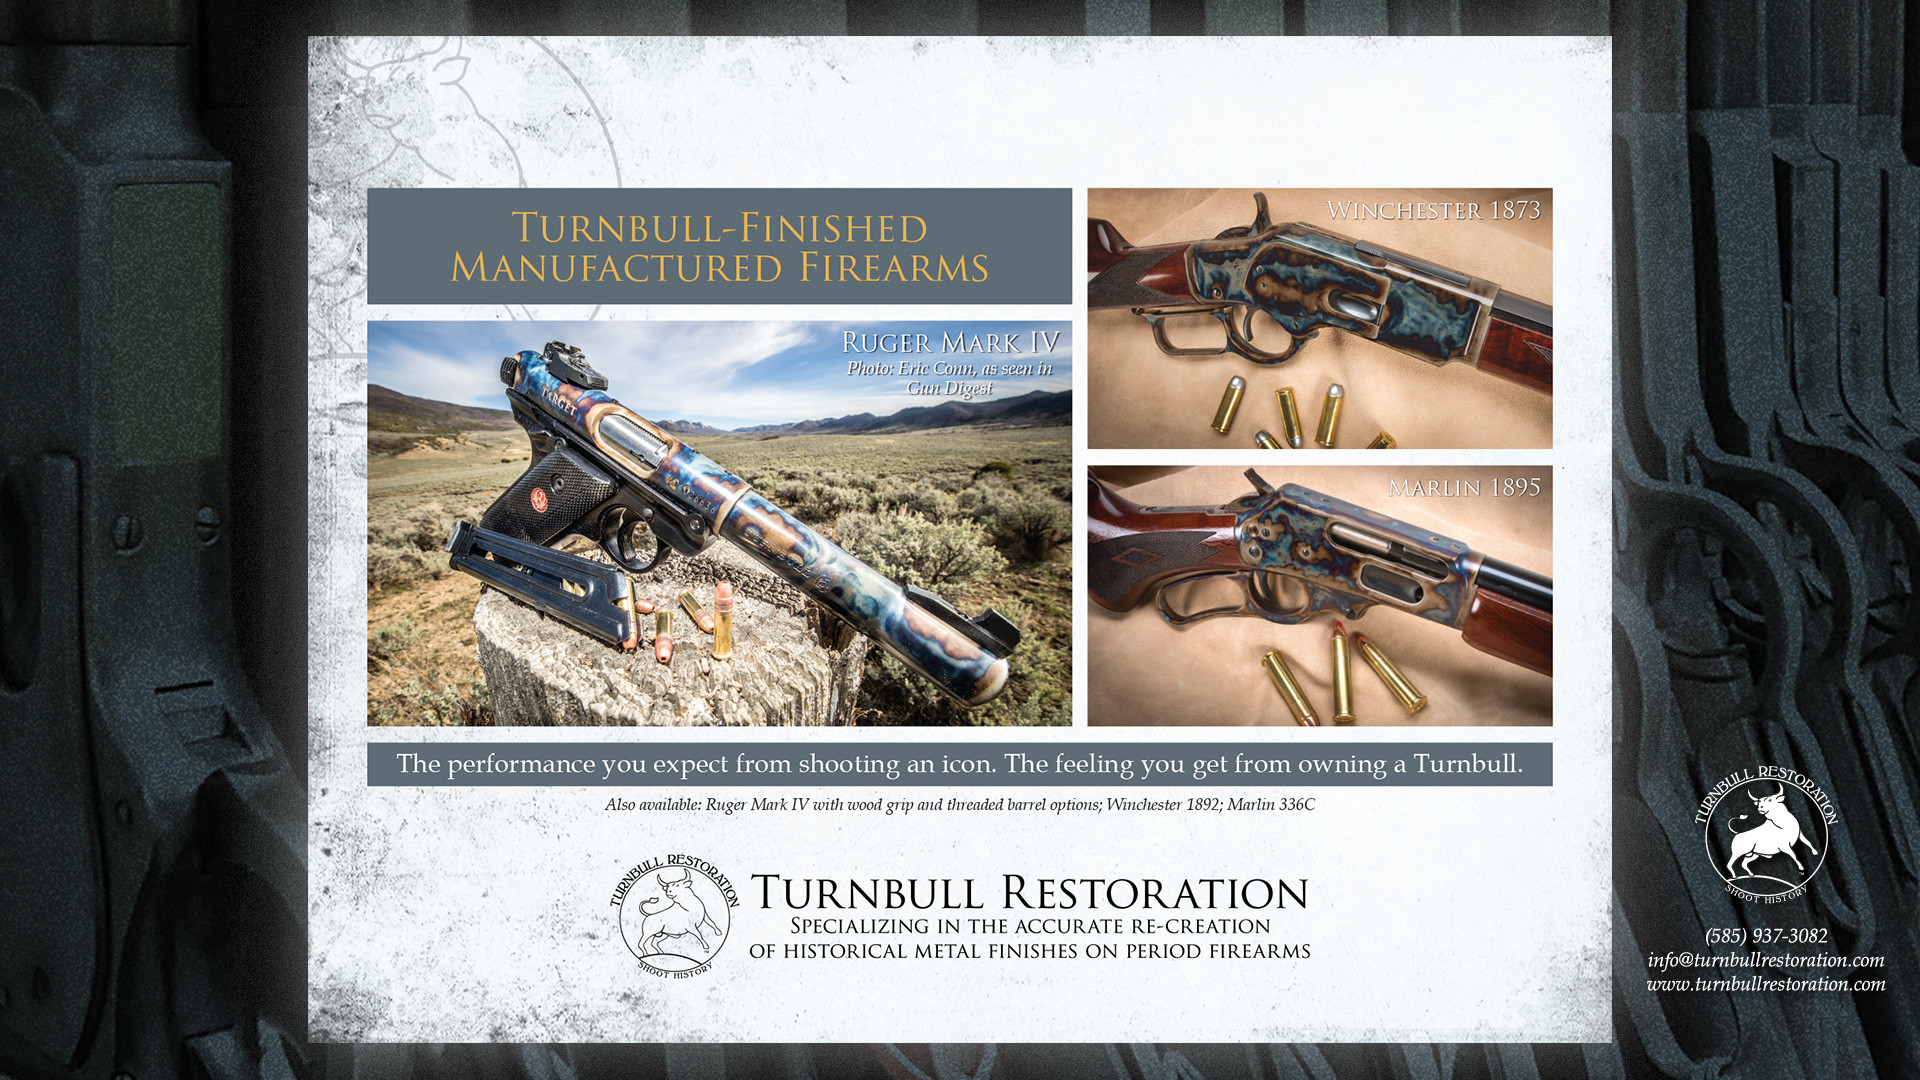 1920x1080 1920 x 1080, Turnbull Ruger Mark IV by Eric Conn, as seen in Gun Digest  Magazine